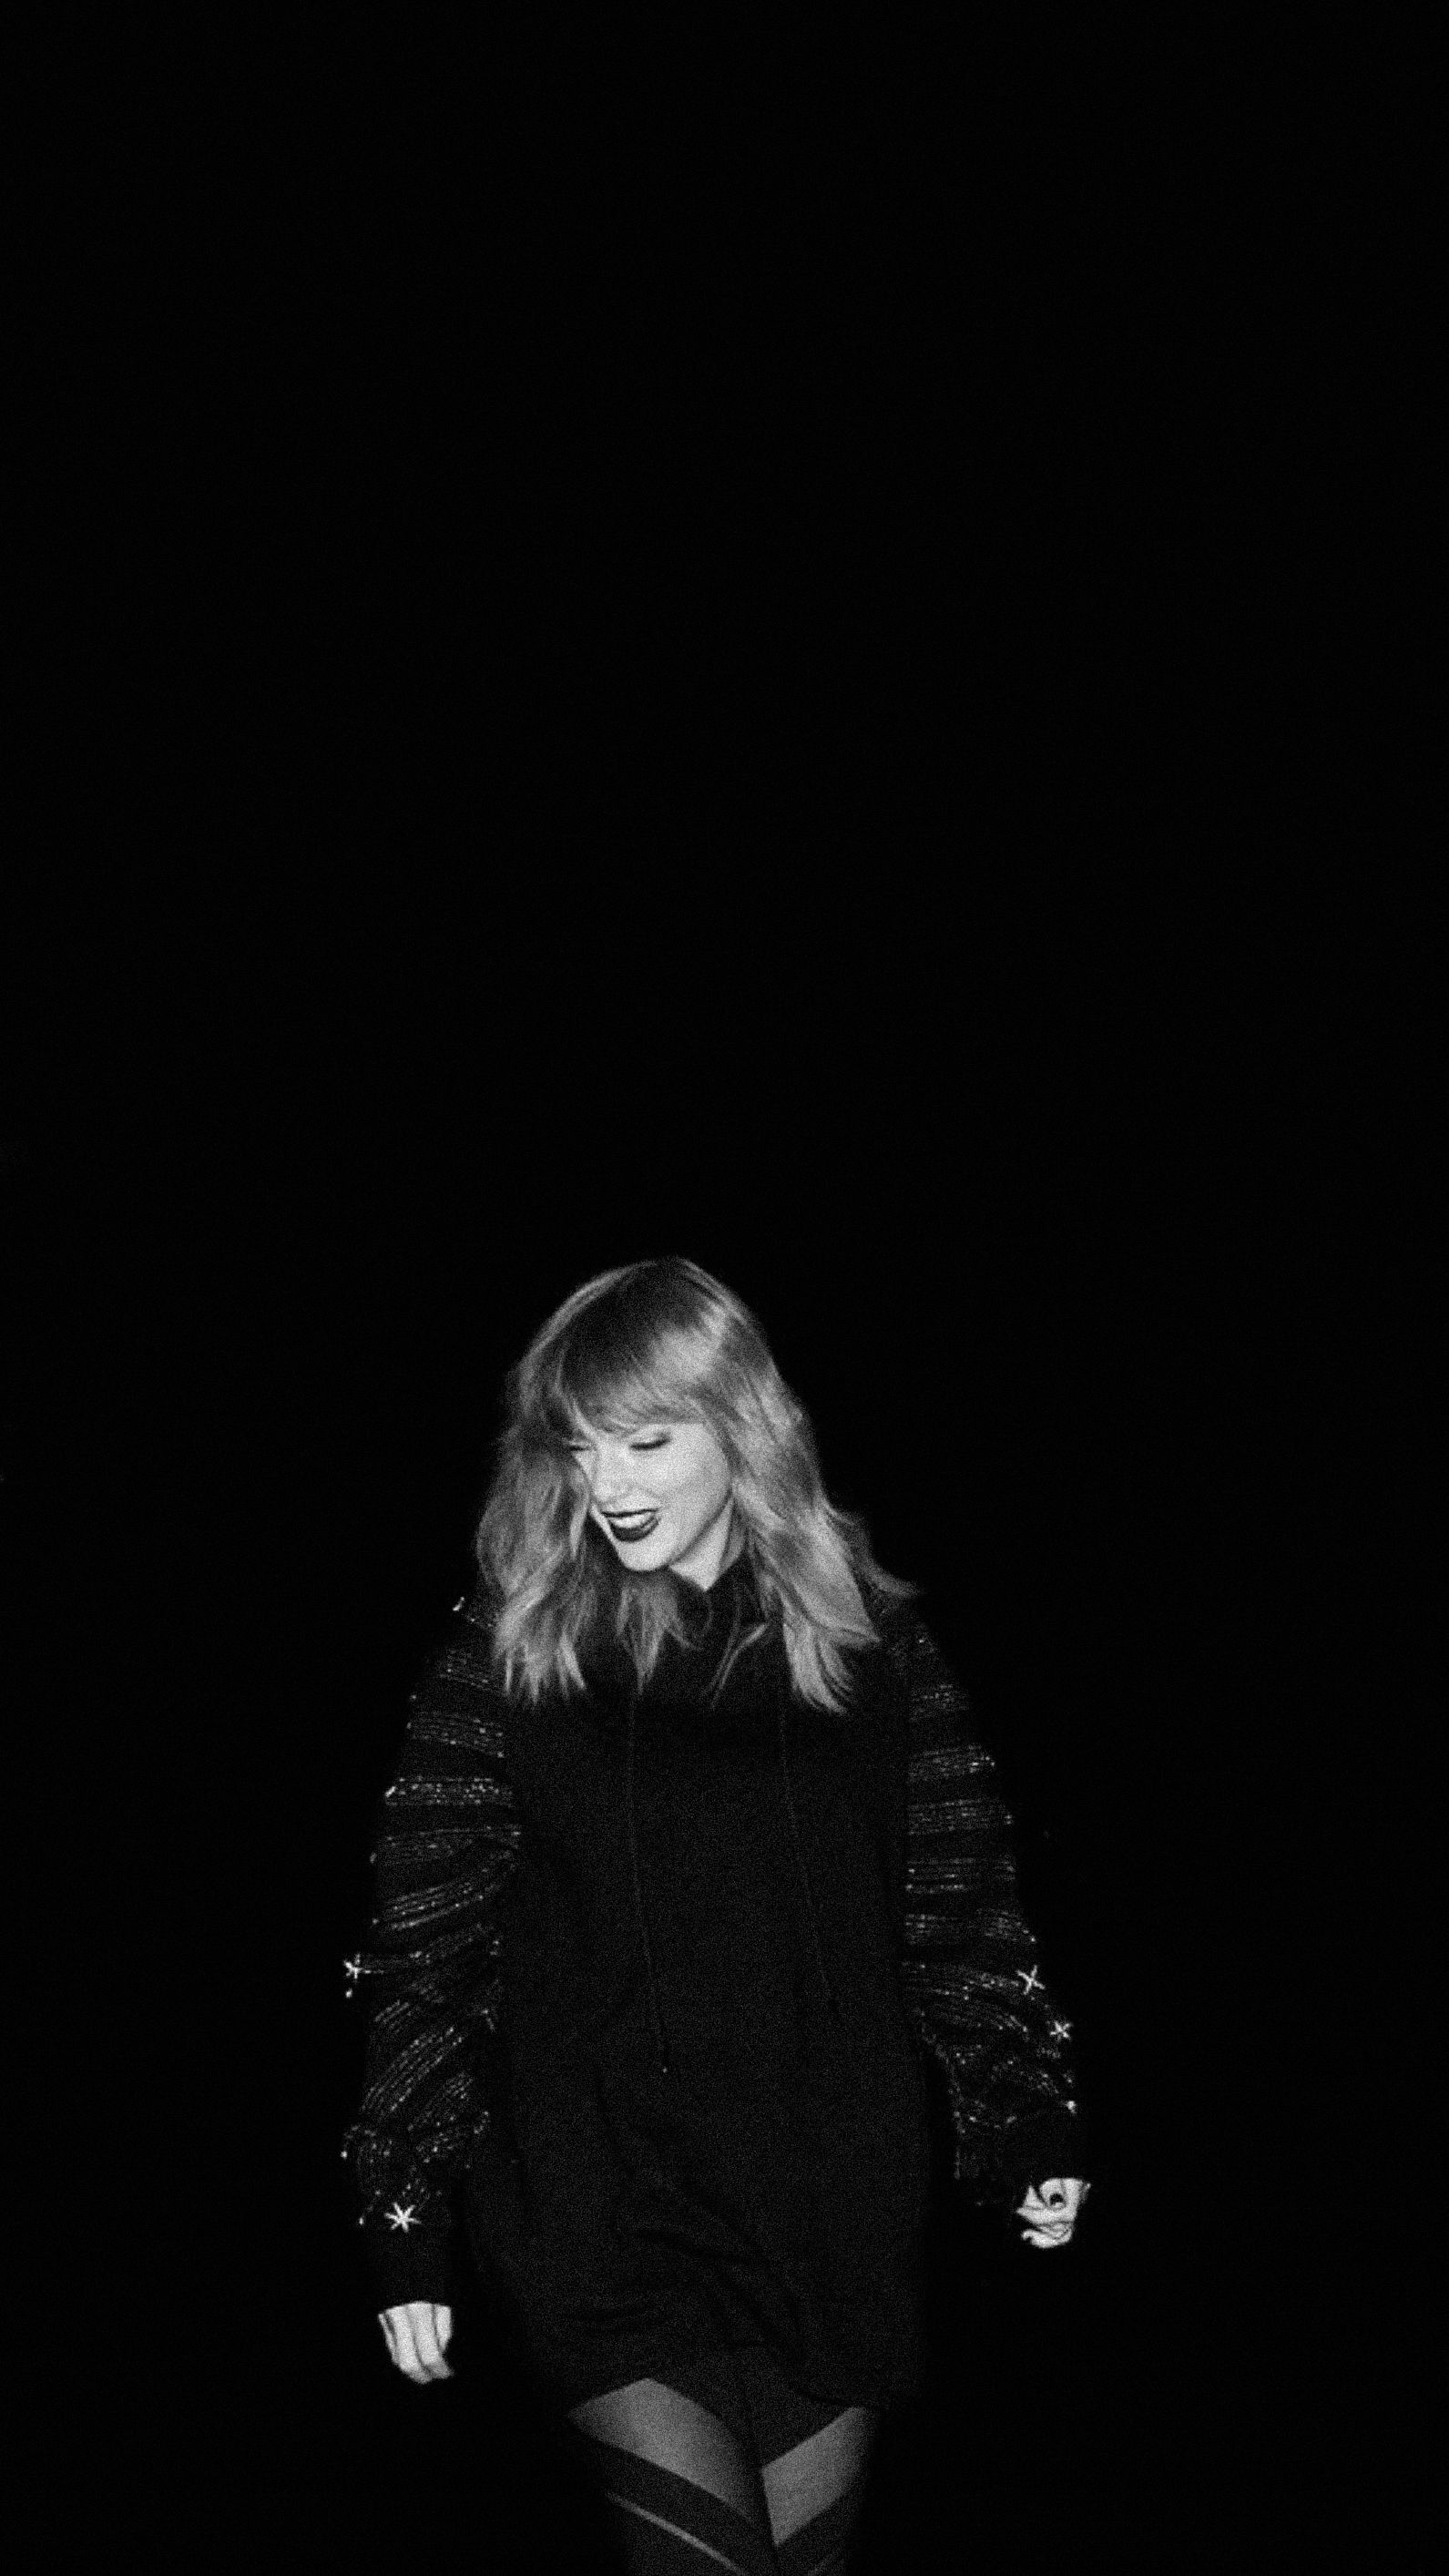 black and white taylor swift wallpaper. Taylor swift wallpaper, Taylor swift picture, Taylor swift album